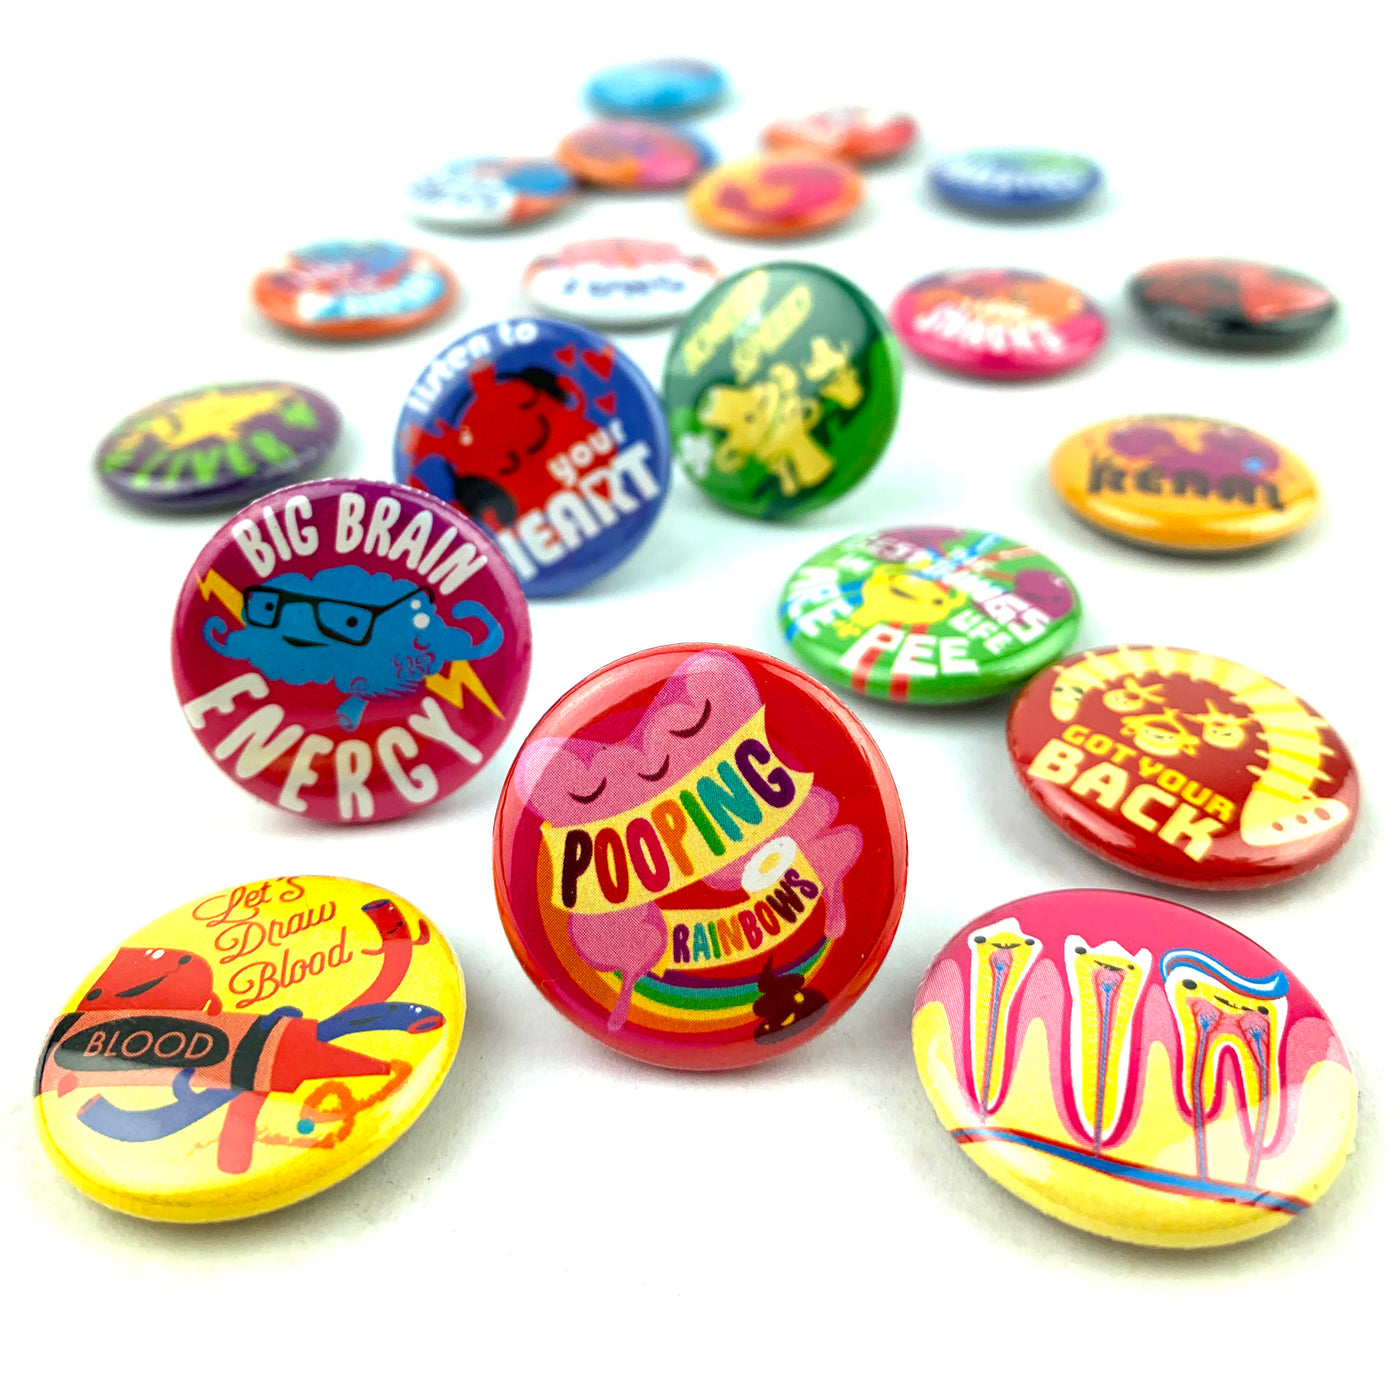 Cute Organs & Health Care Funny Button Set of 20 Badges